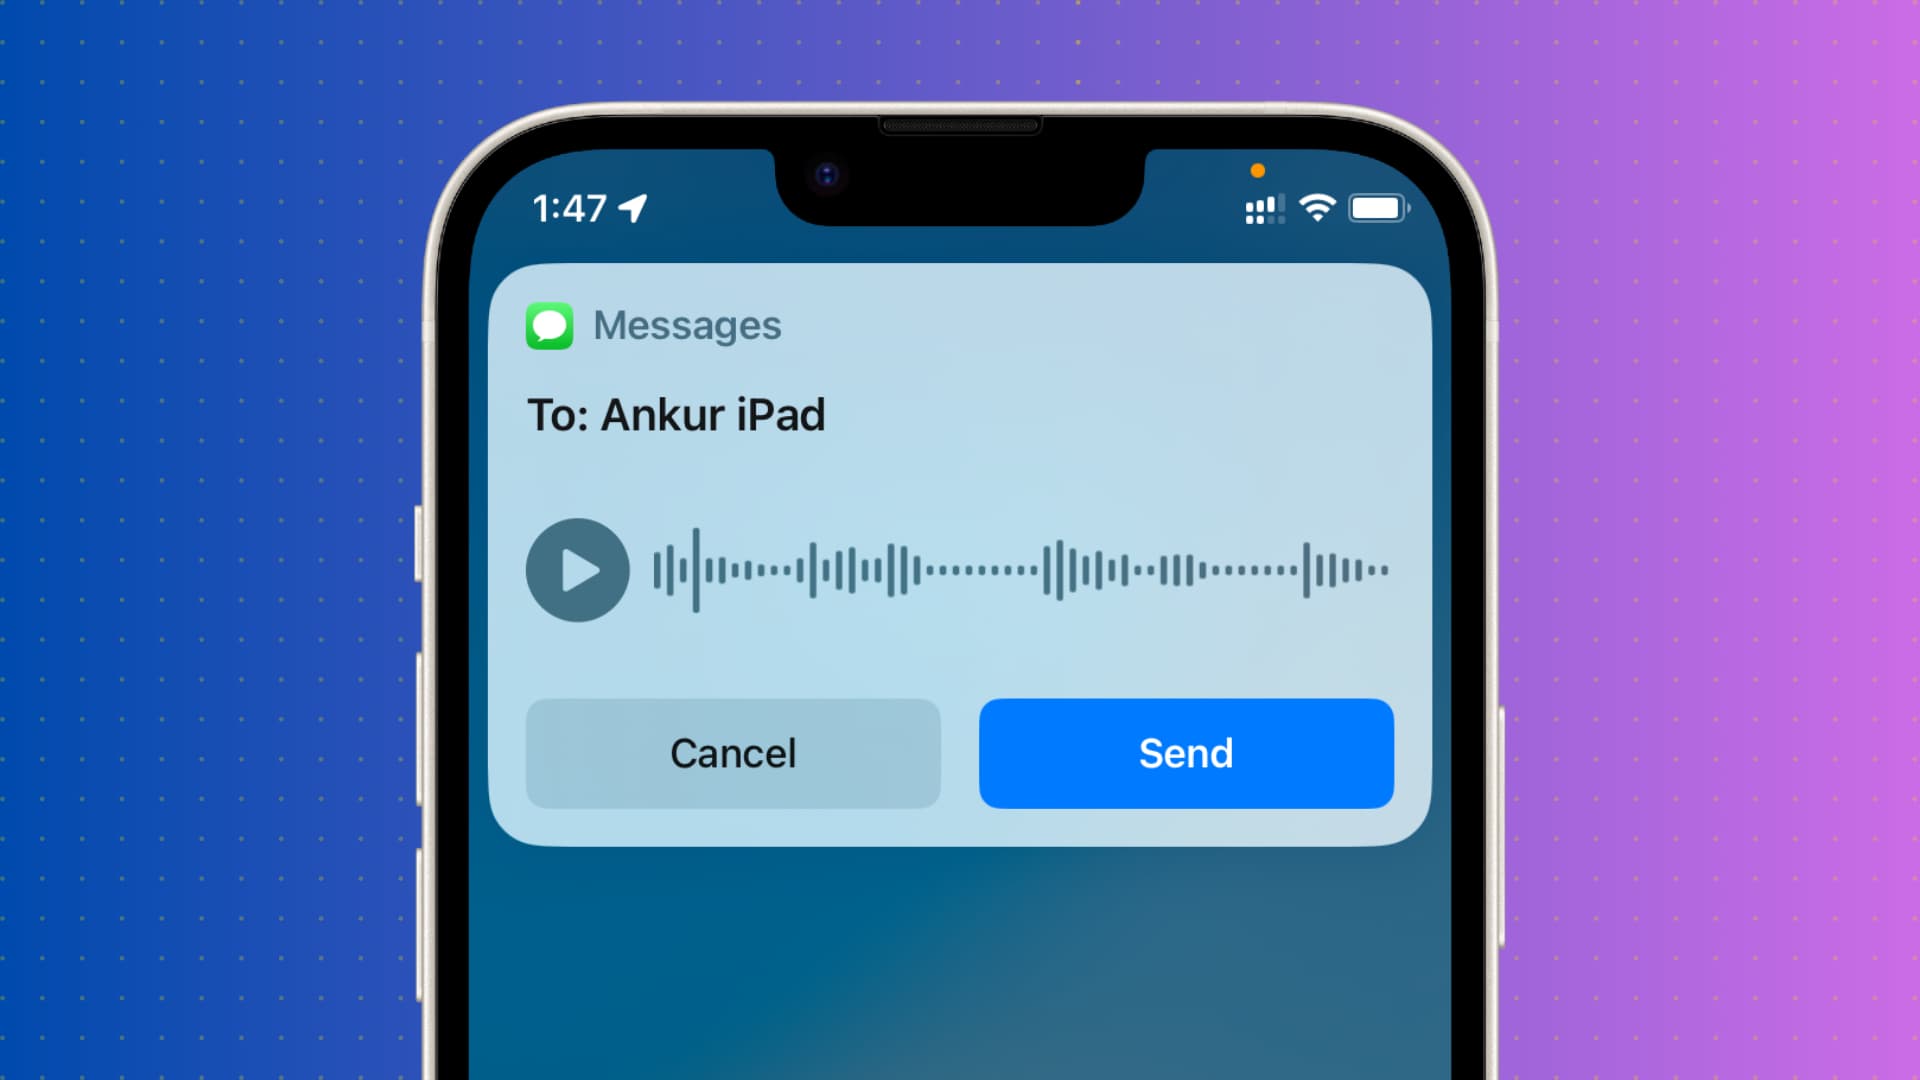 Sending a audio message using Siri from iPhone